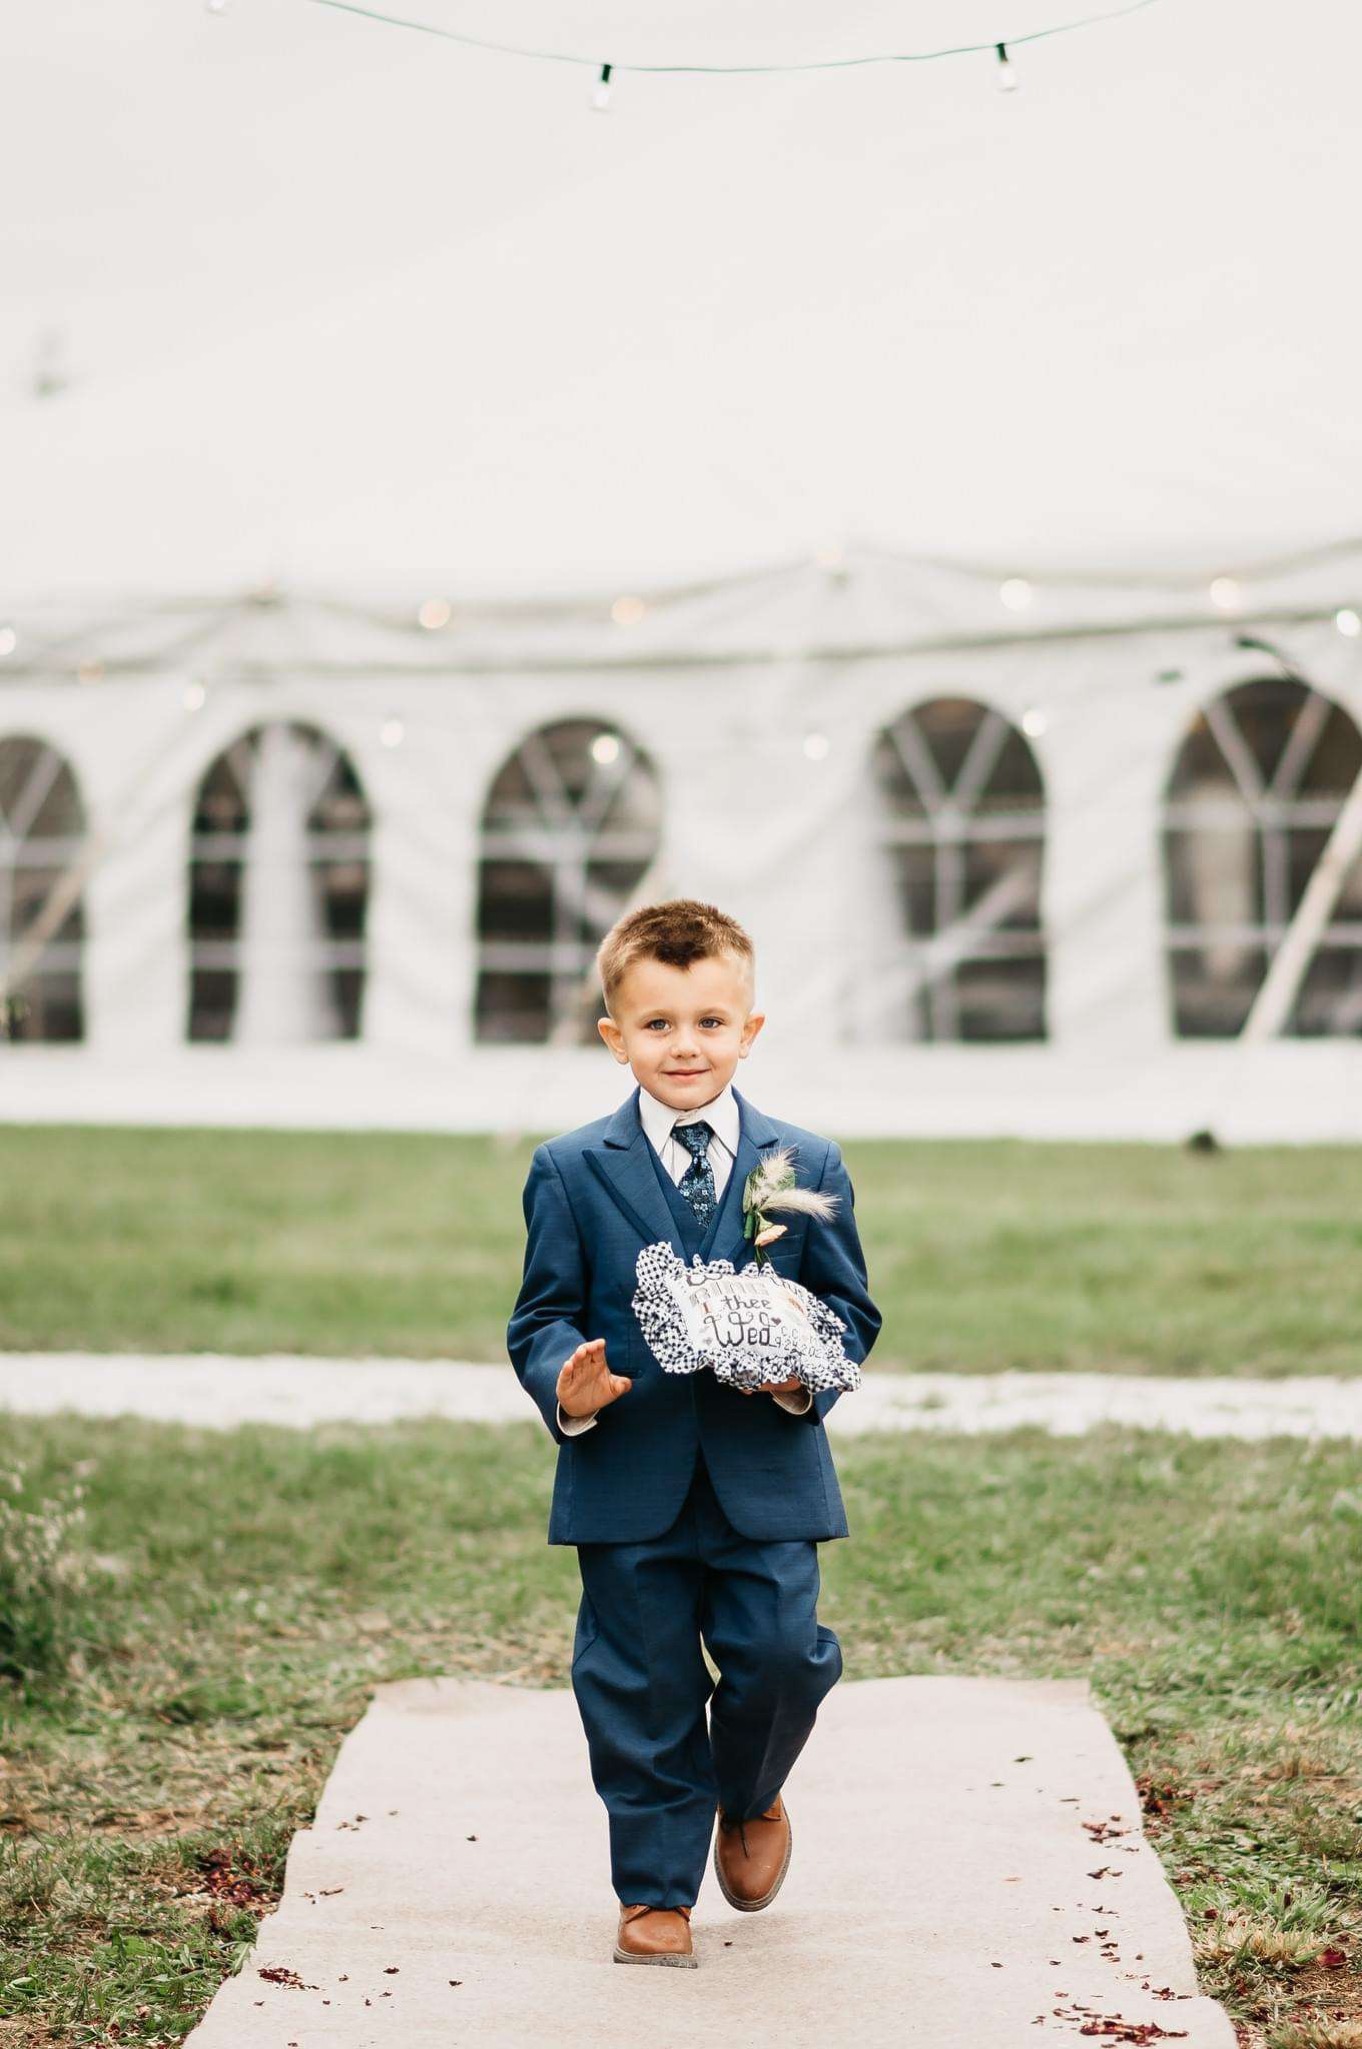 How to Choose Flower Girls and Ring Bearers